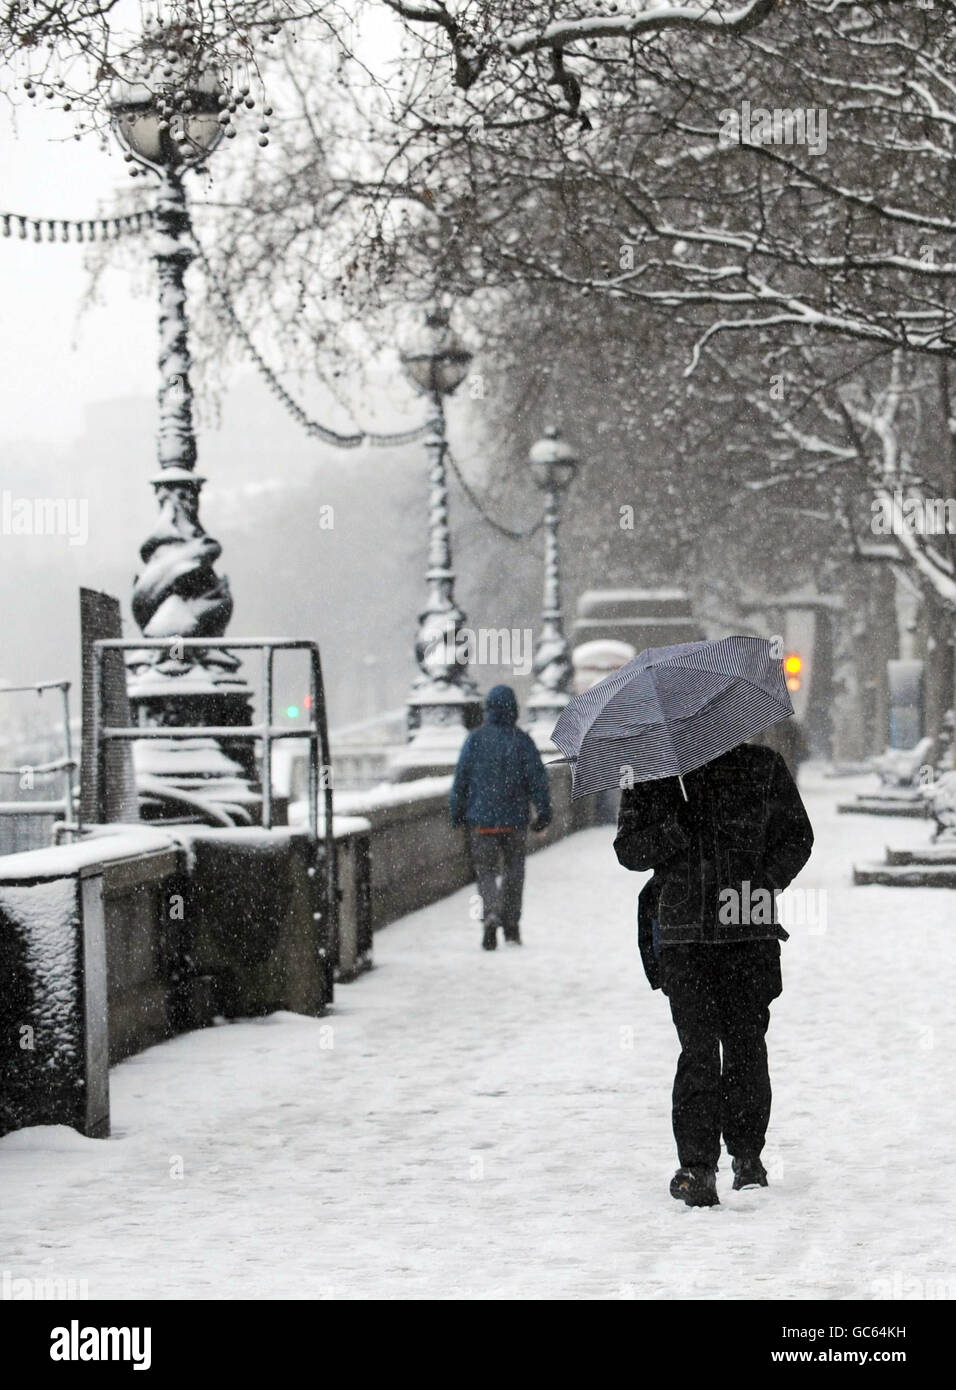 Commuters on the Embankment in London this morning brave blizzard conditions on their way to work. Stock Photo